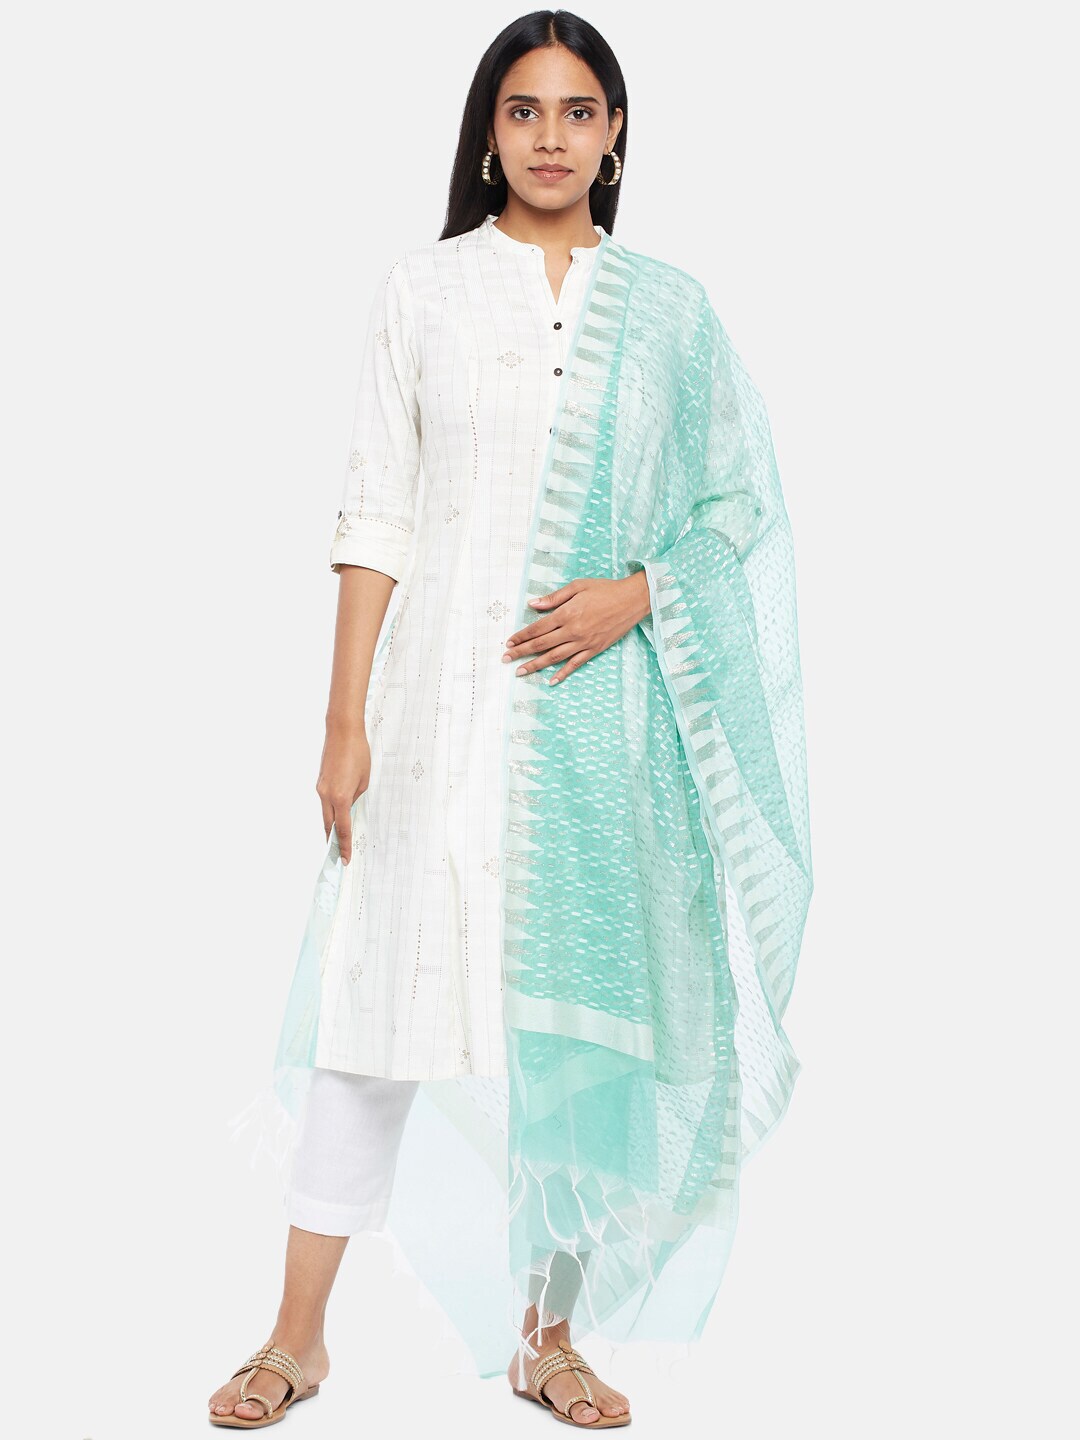 RANGMANCH BY PANTALOONS Turquoise Blue & Silver-Toned Woven Design Dupatta Price in India